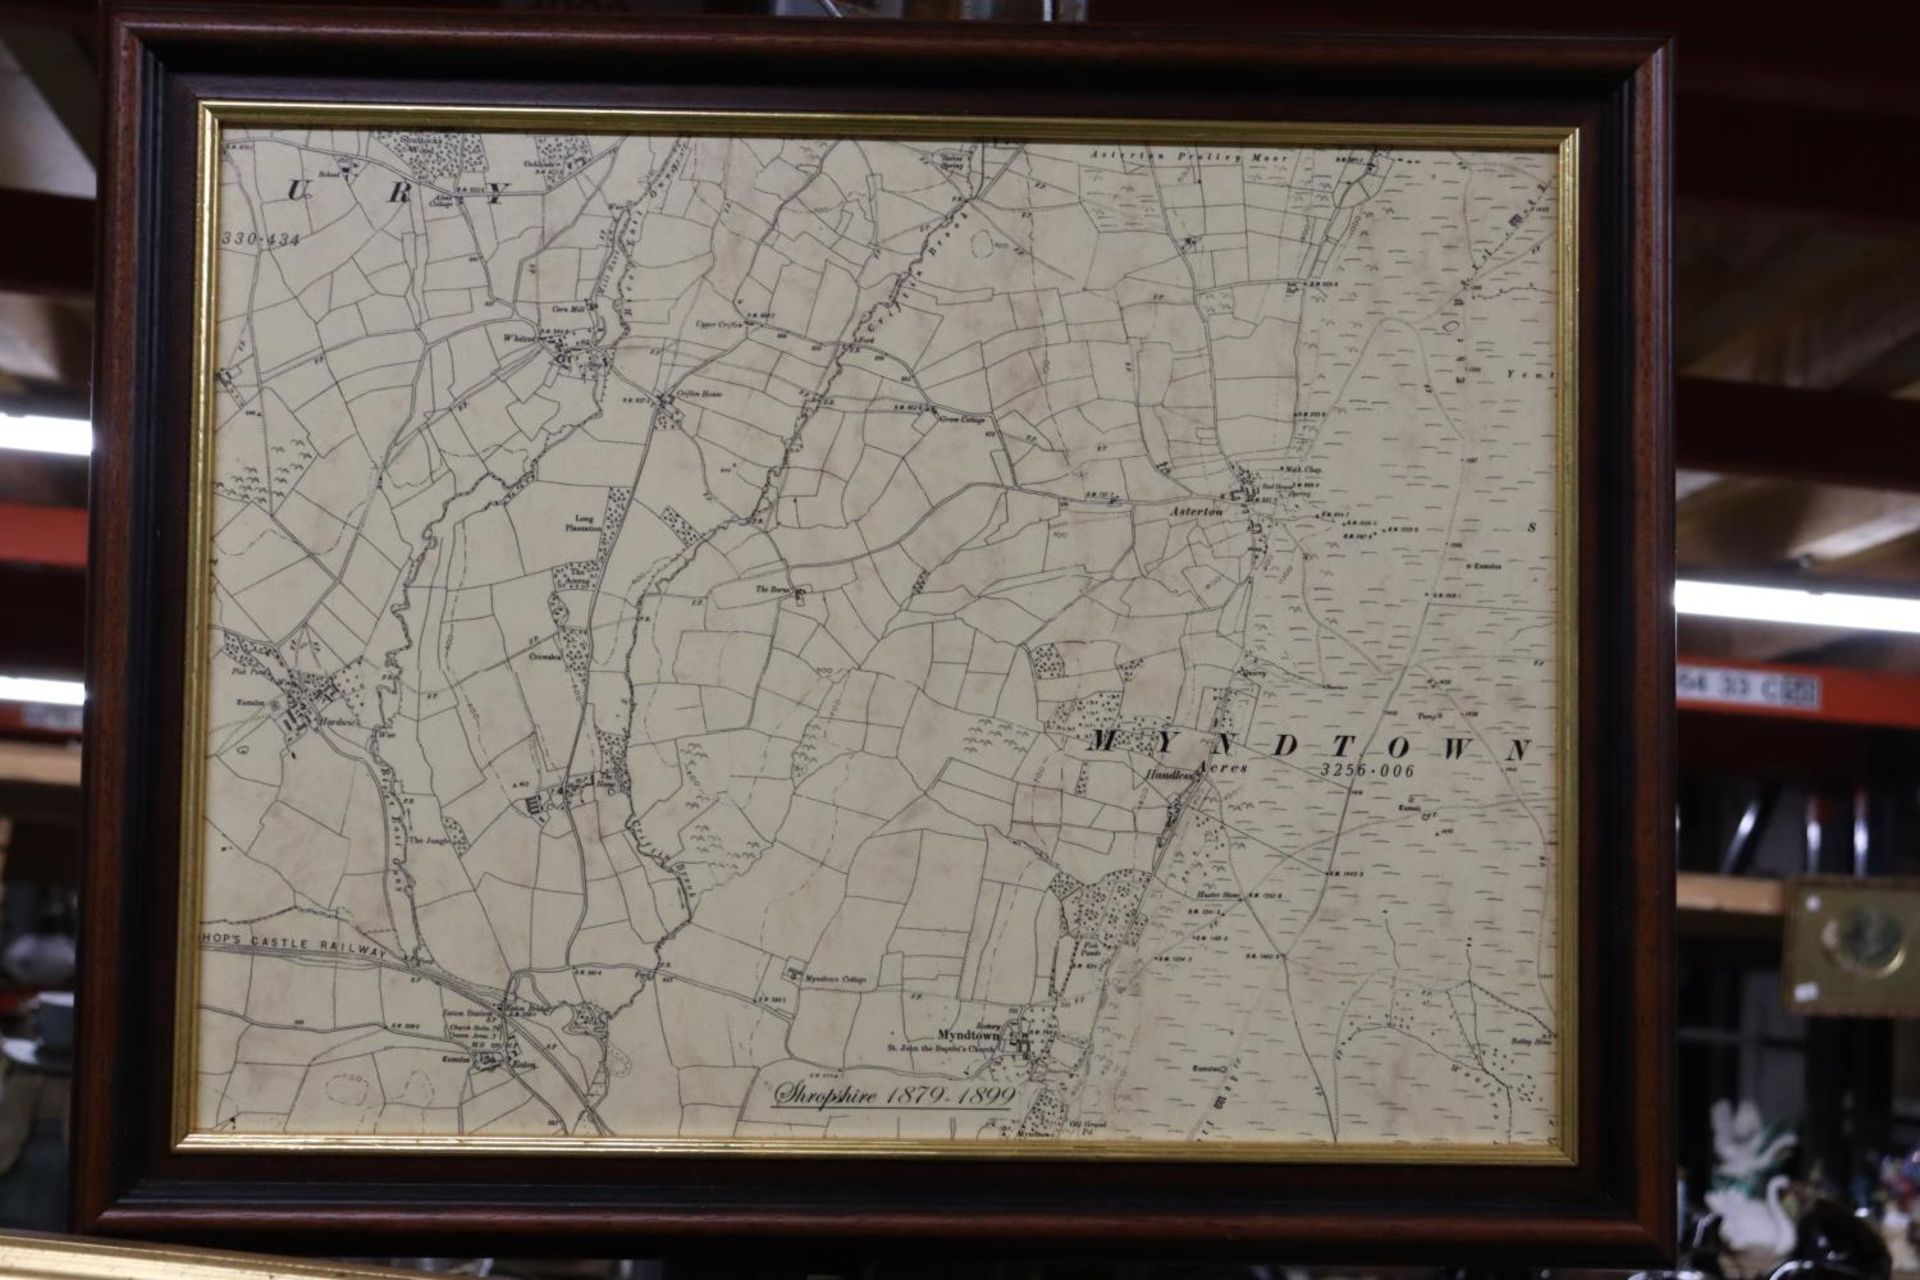 TWO FRAMED MAPS, ONE OF SHROPSHIRE 1879-1899, THE OTHER A PRINT OF SAXTON'S MAP OF ENGLAND AND - Image 2 of 5